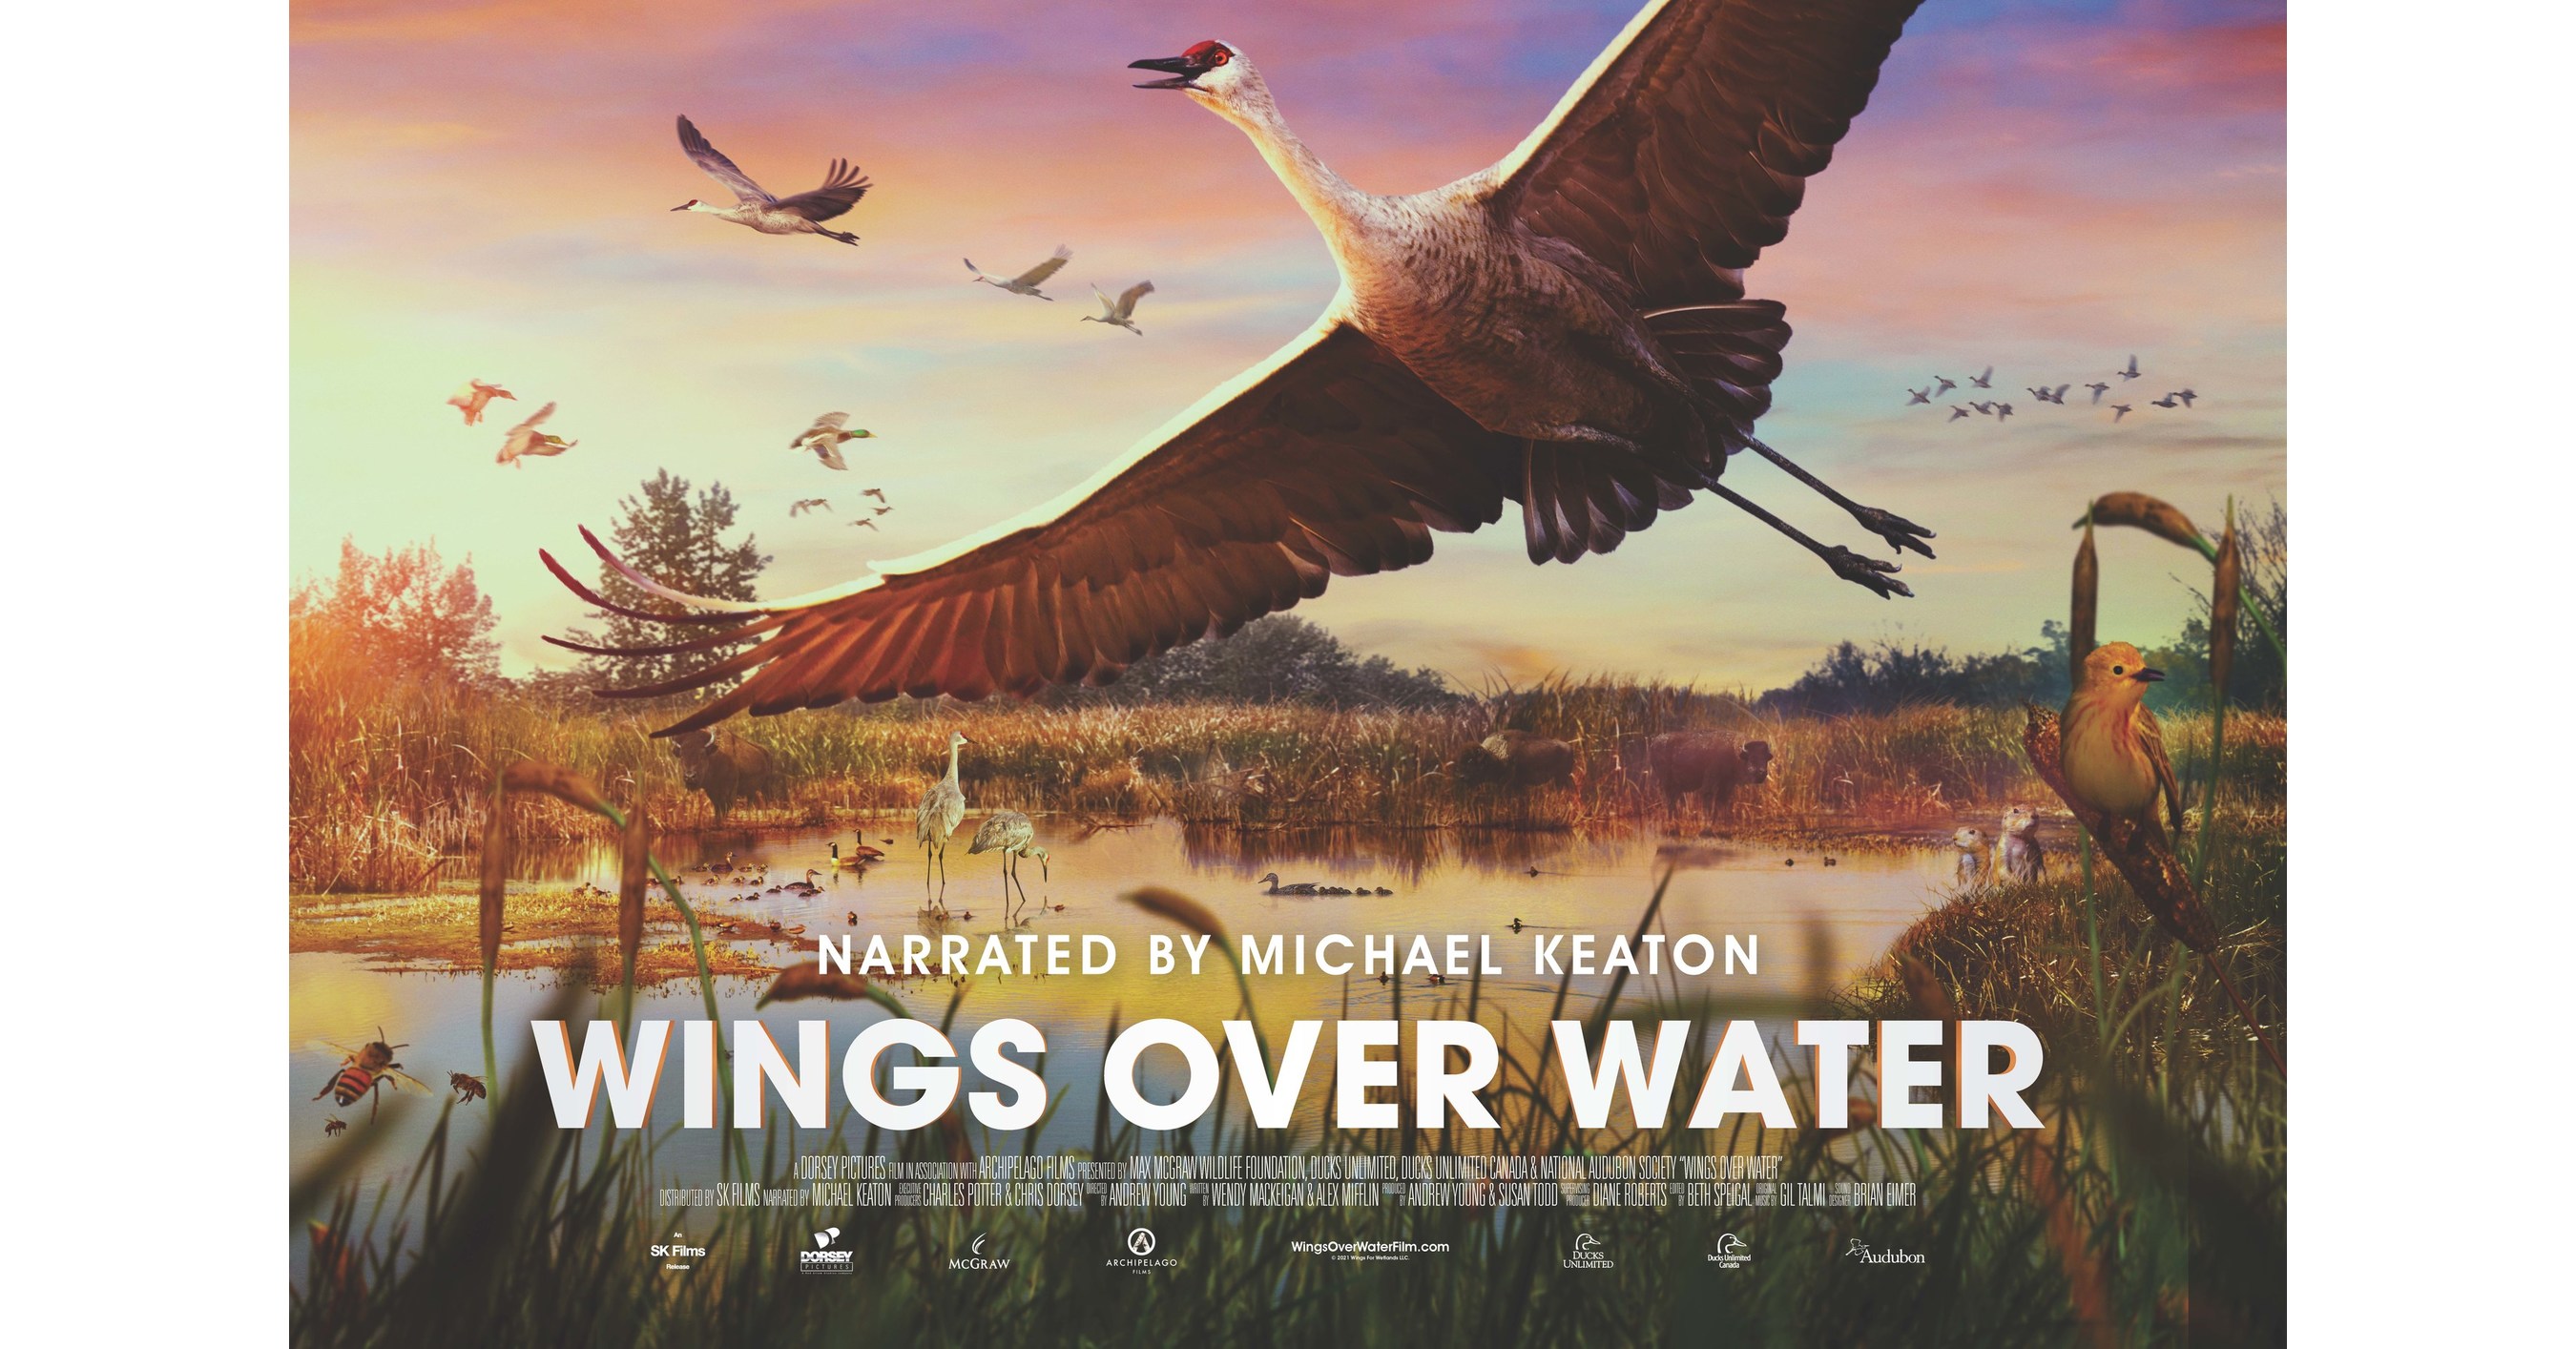 Wings Over Water documentary captivates audiences with a bird's eye